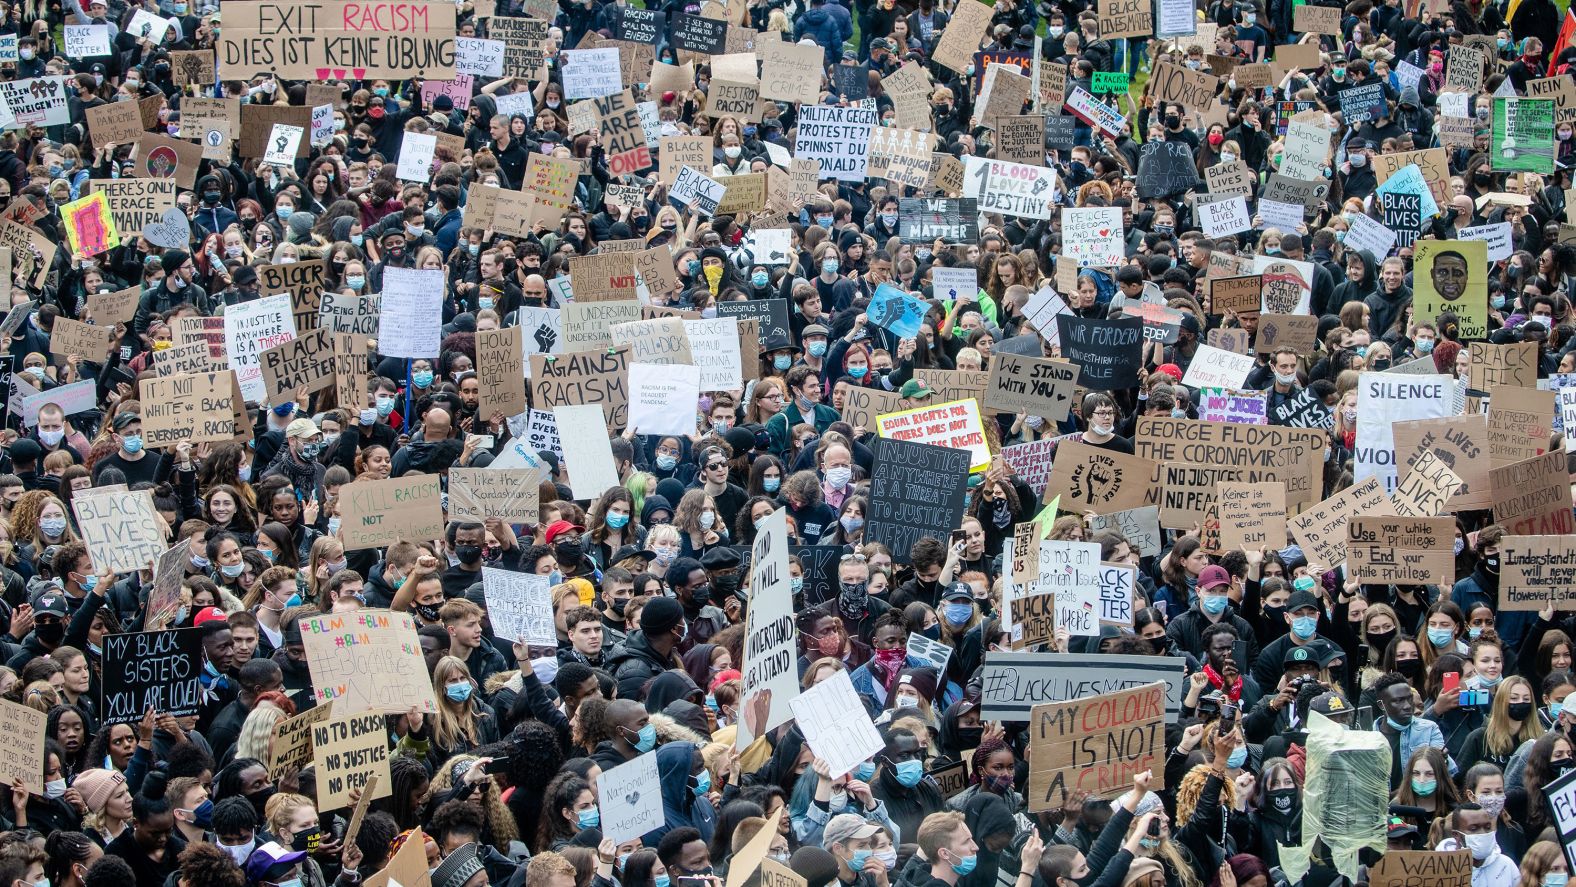 A large crowd demonstrates in Stuttgart, Germany.